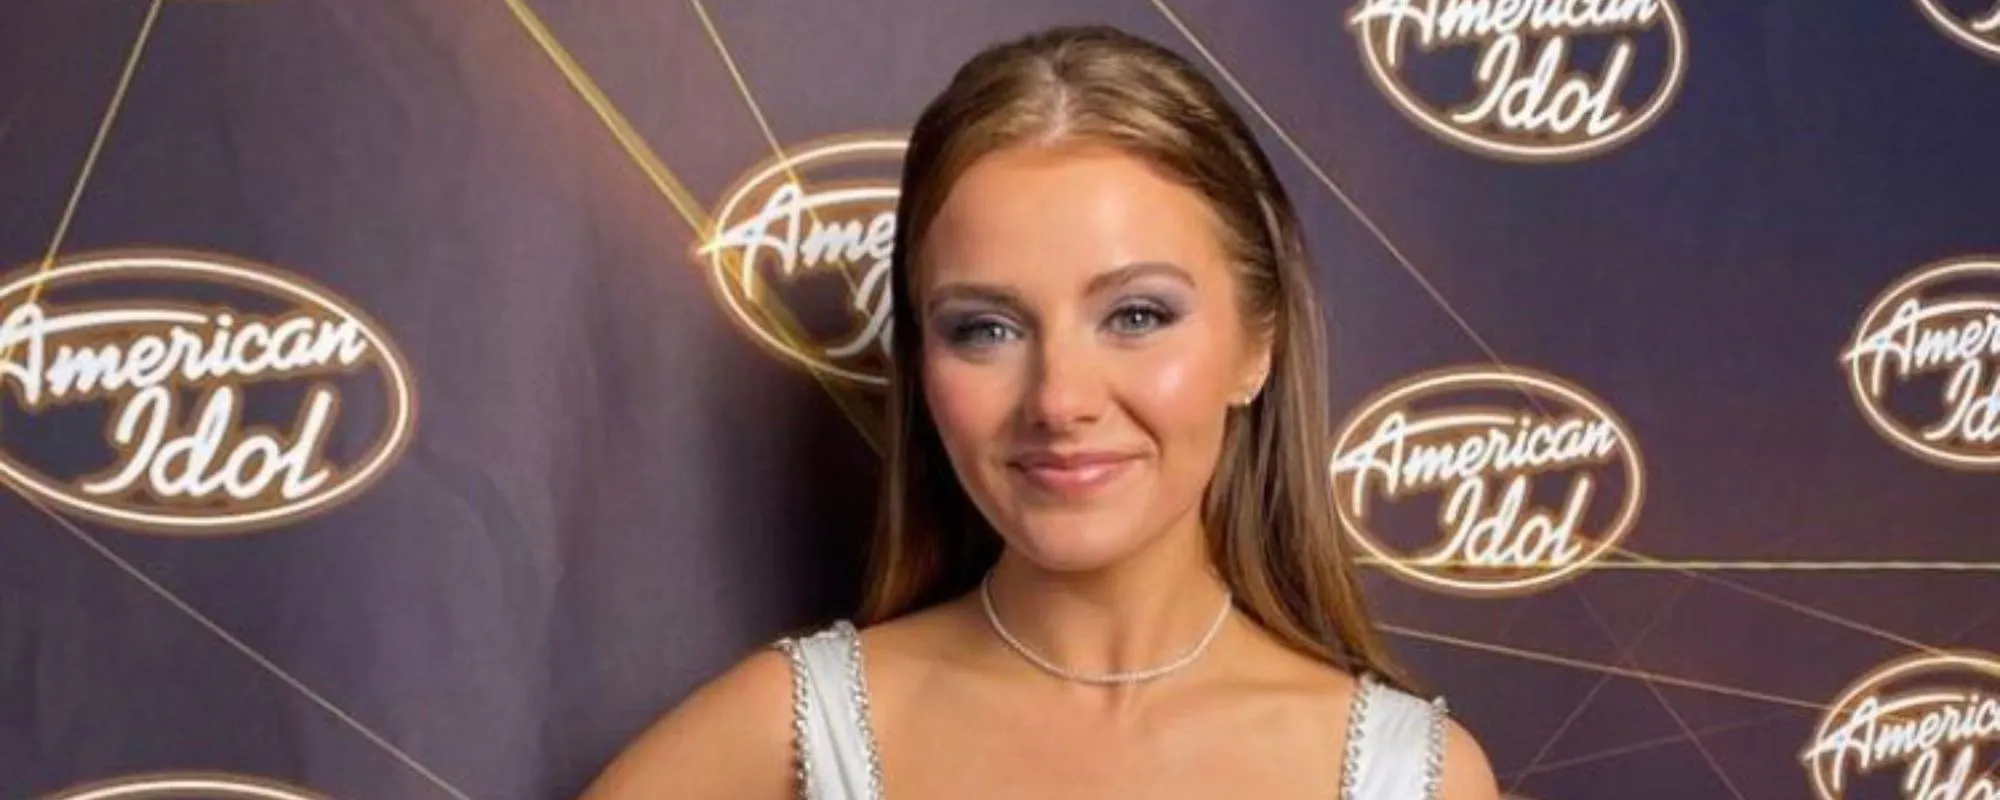 What Were the Top Songs from the Year ‘American Idol’ Star Emmy Russell Was Born?